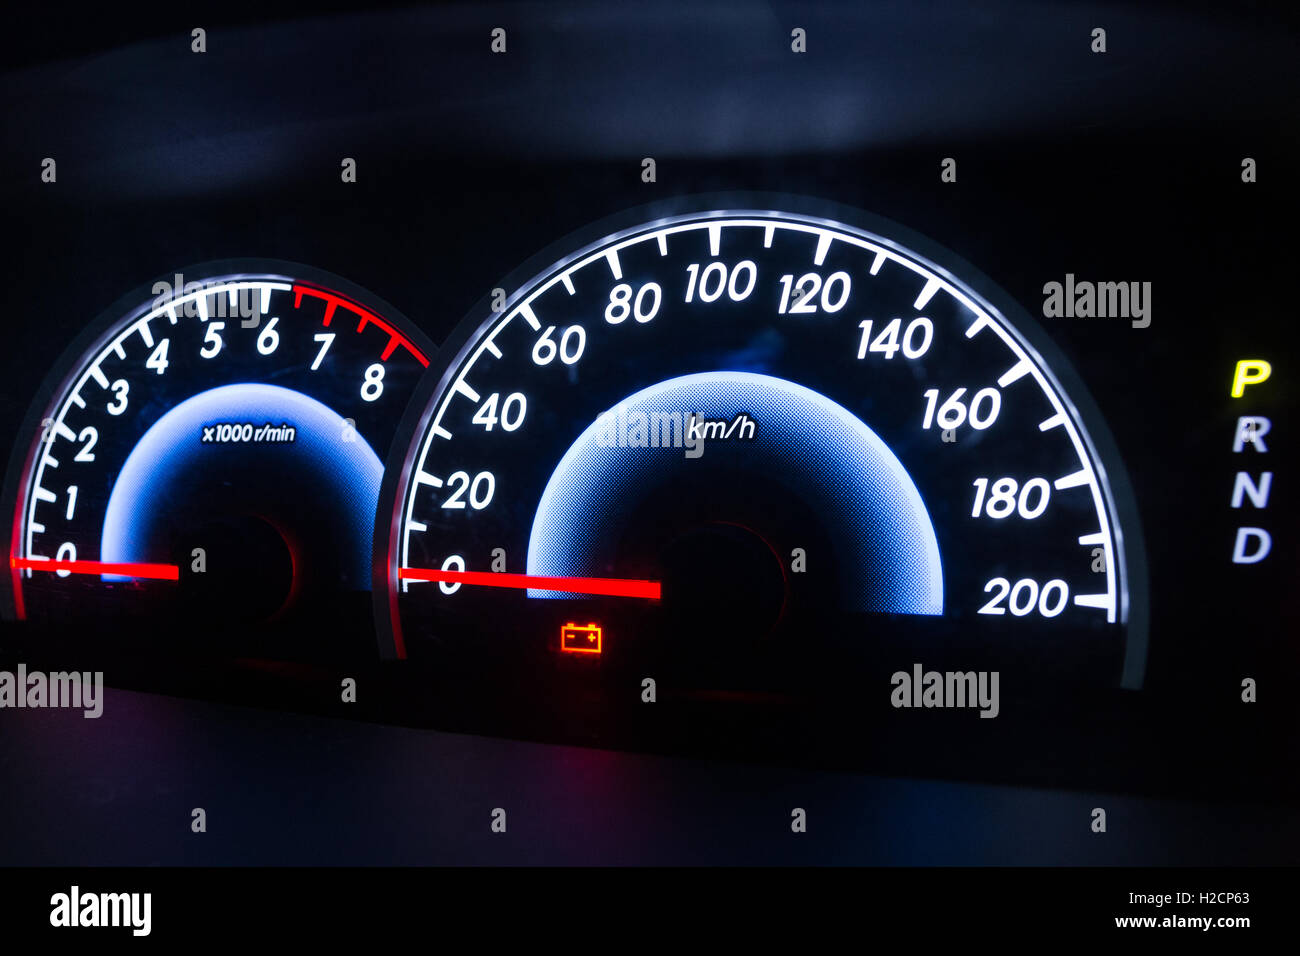 Vehicle Speed Meter Of Pick Up, Speed Engine. Stock Photo, Picture and  Royalty Free Image. Image 70053704.